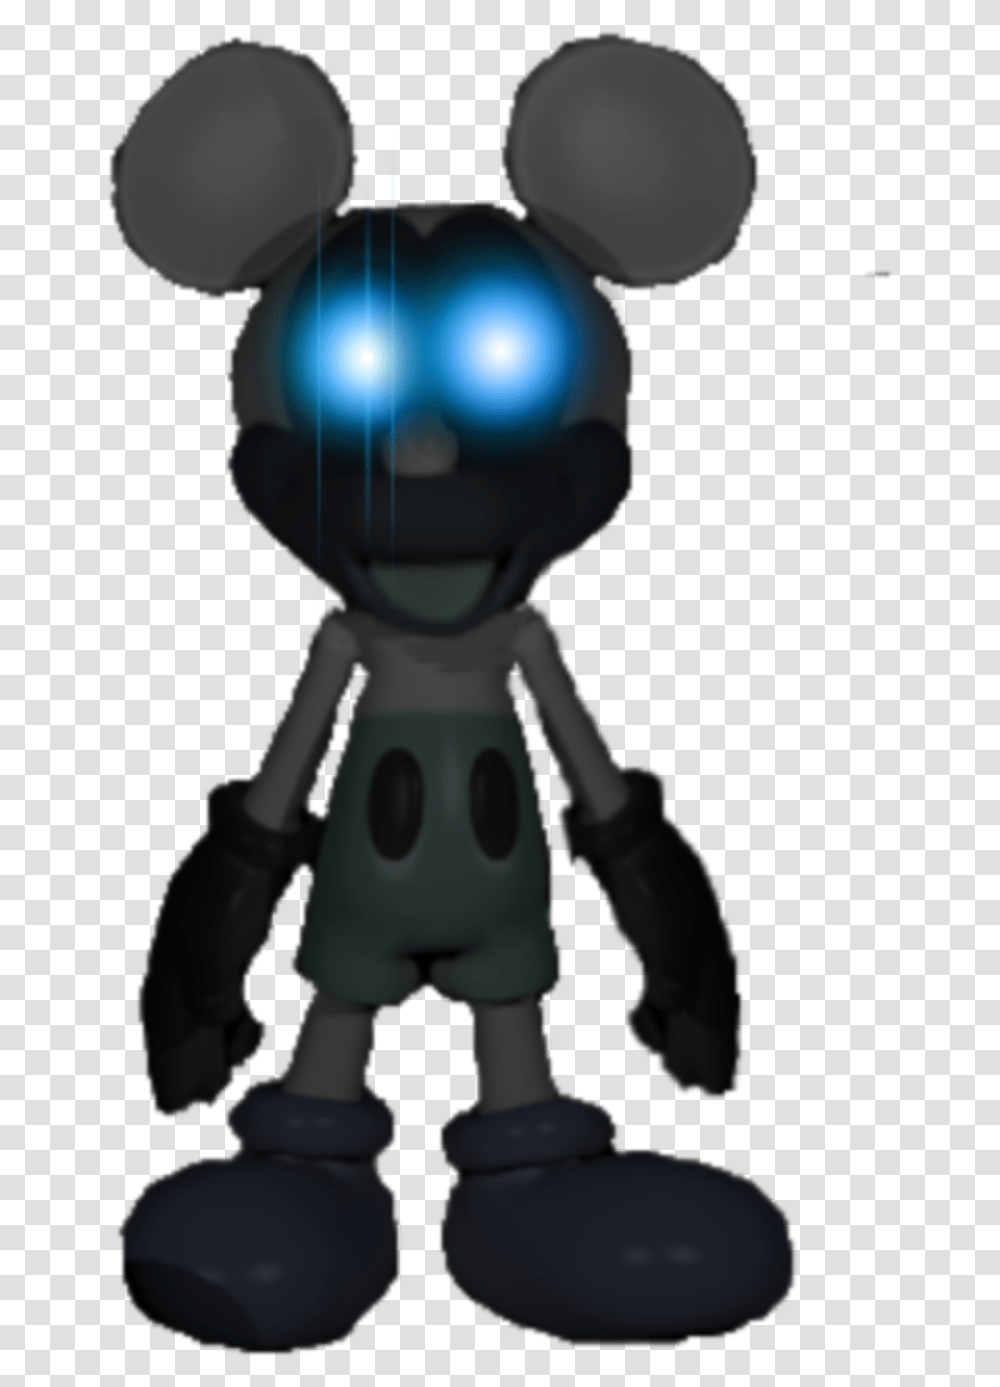 Discovery Island Rp Wikia Negative Mickey Fnati, Toy, Robot Transparent Png